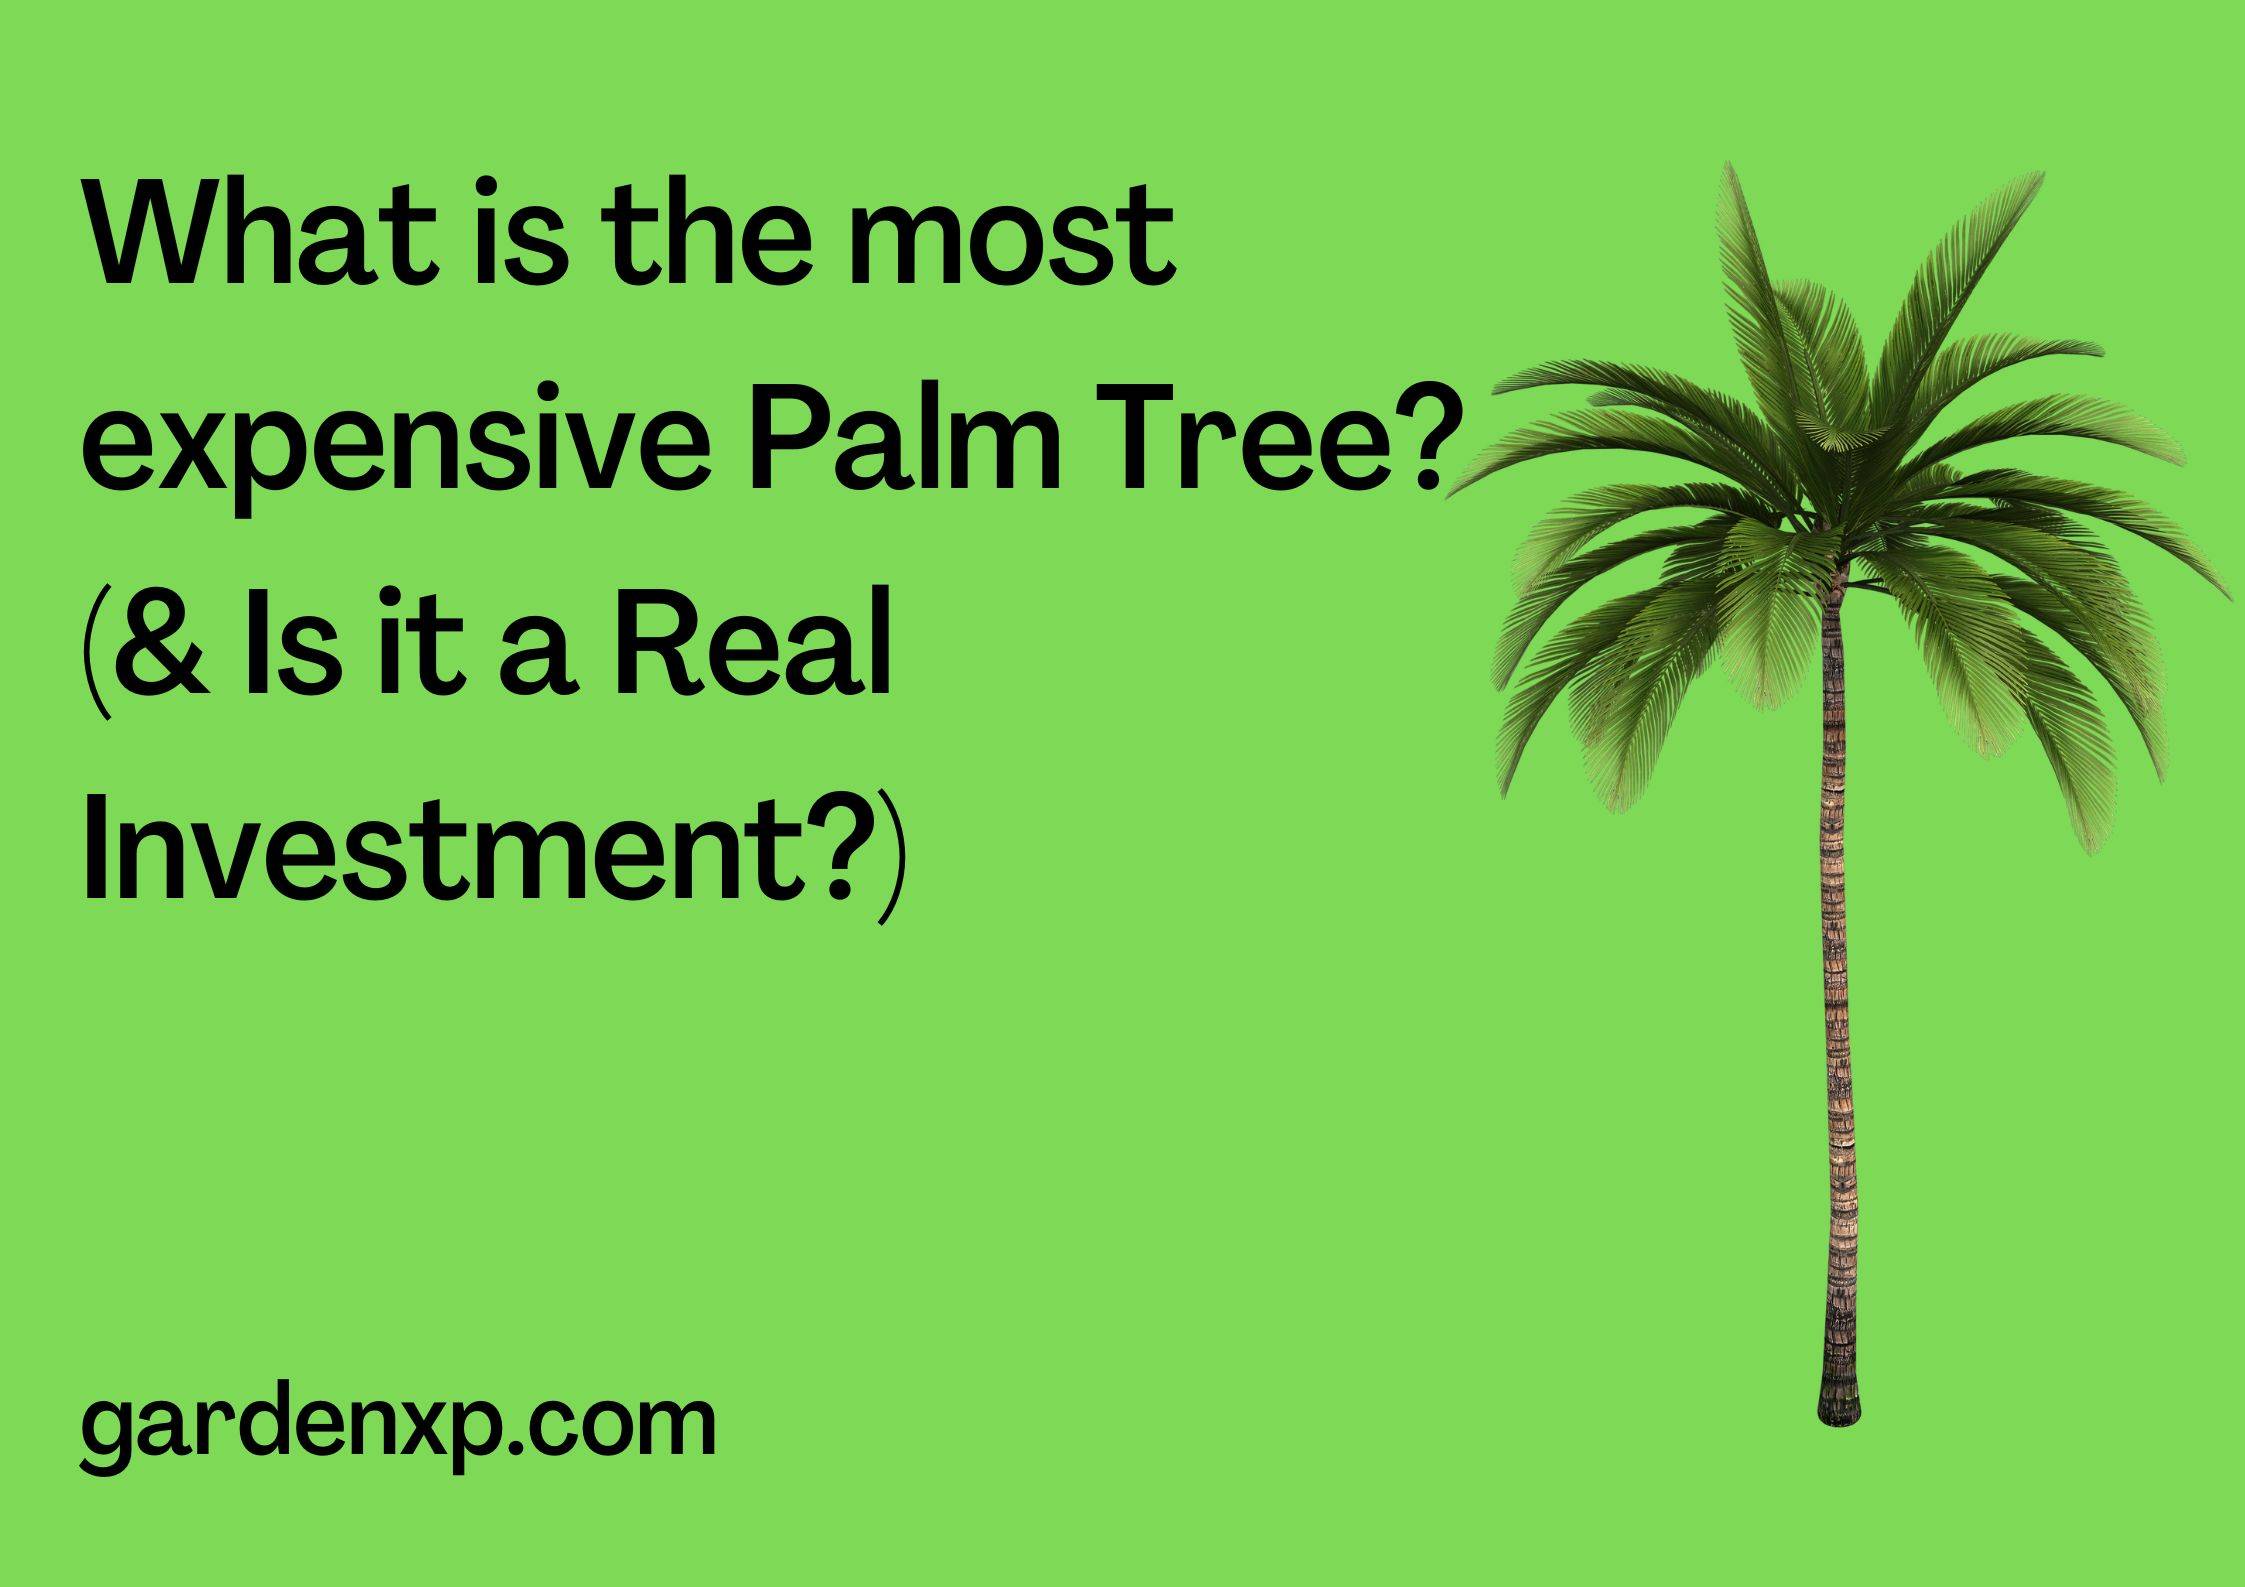 What is the most expensive Palm Tree? (& Is it a Real Investment?)